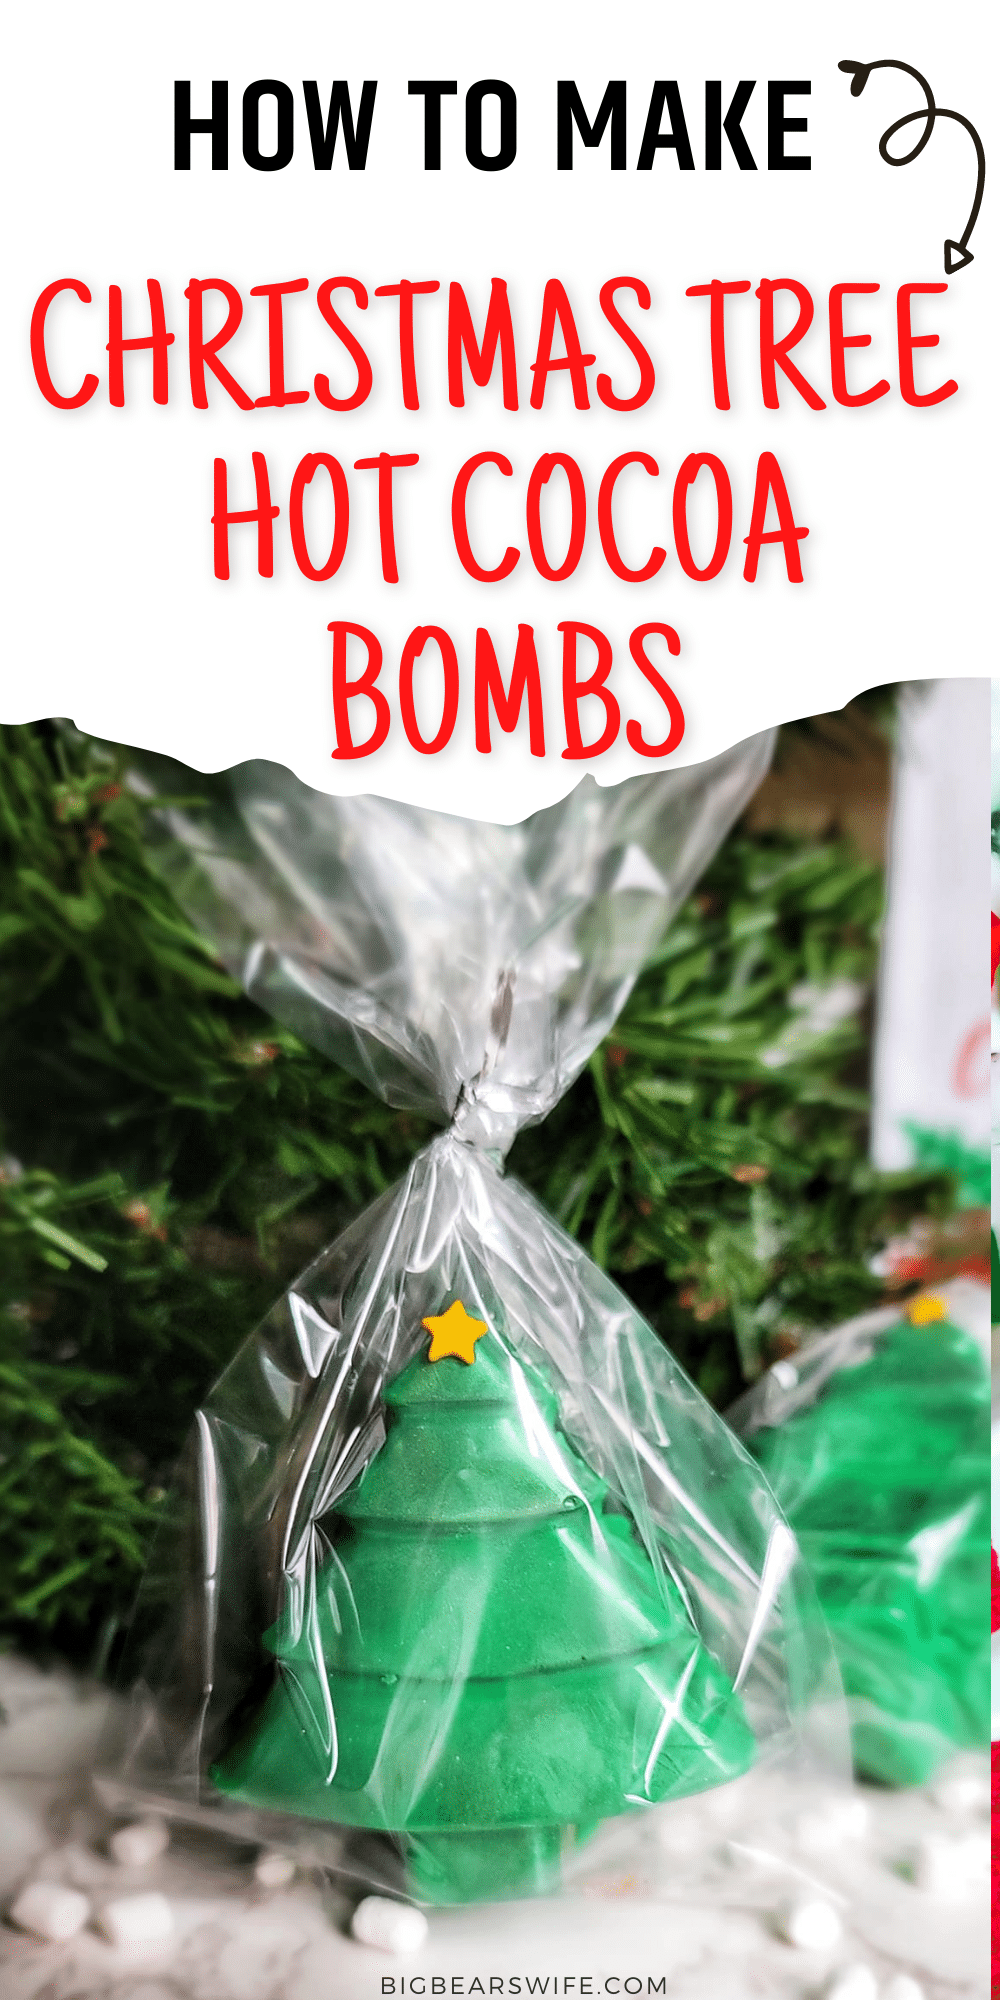 These sweet Christmas Tree Hot Cocoa Bombs are the perfect stocking stuffers and just simply adorable! Perfect for Christmas or Yule time celebrations!  via @bigbearswife